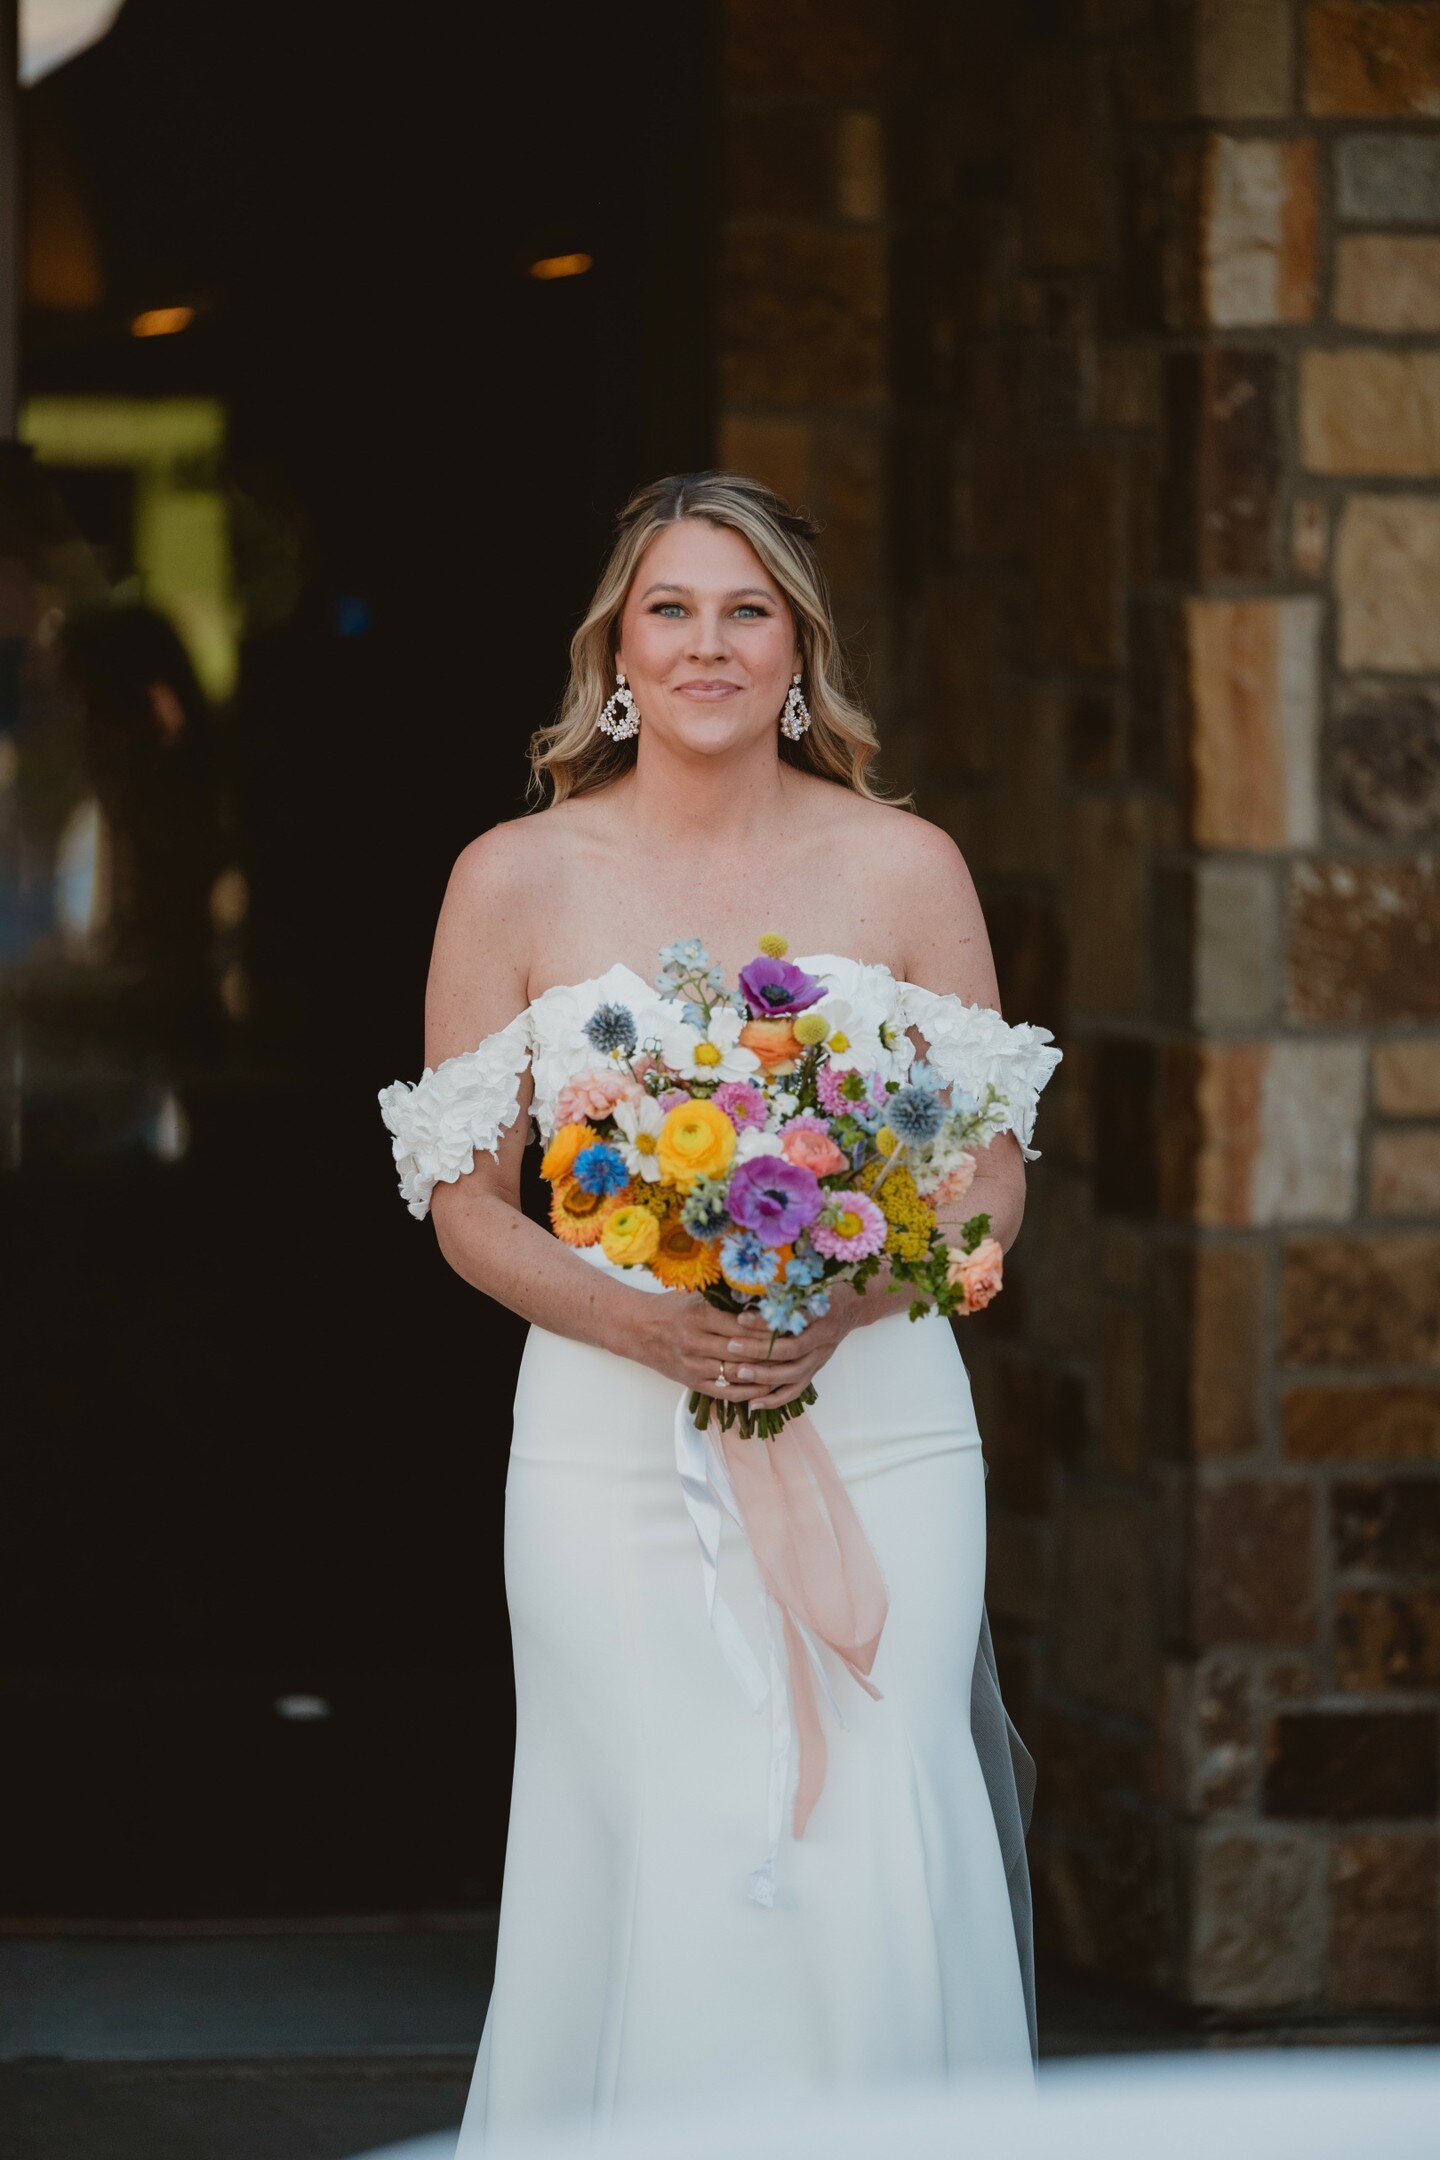 Fun fact this incredible bride is having a BABY this month! Reminiscing on this gorgeous day with this gorgeous bride. 

Planner: @asyouwishco
Photographer: @sarah_e_photo
Venue: @viceroysnowmass

#mountainwedding #coloradomountainwedding #coloradosu